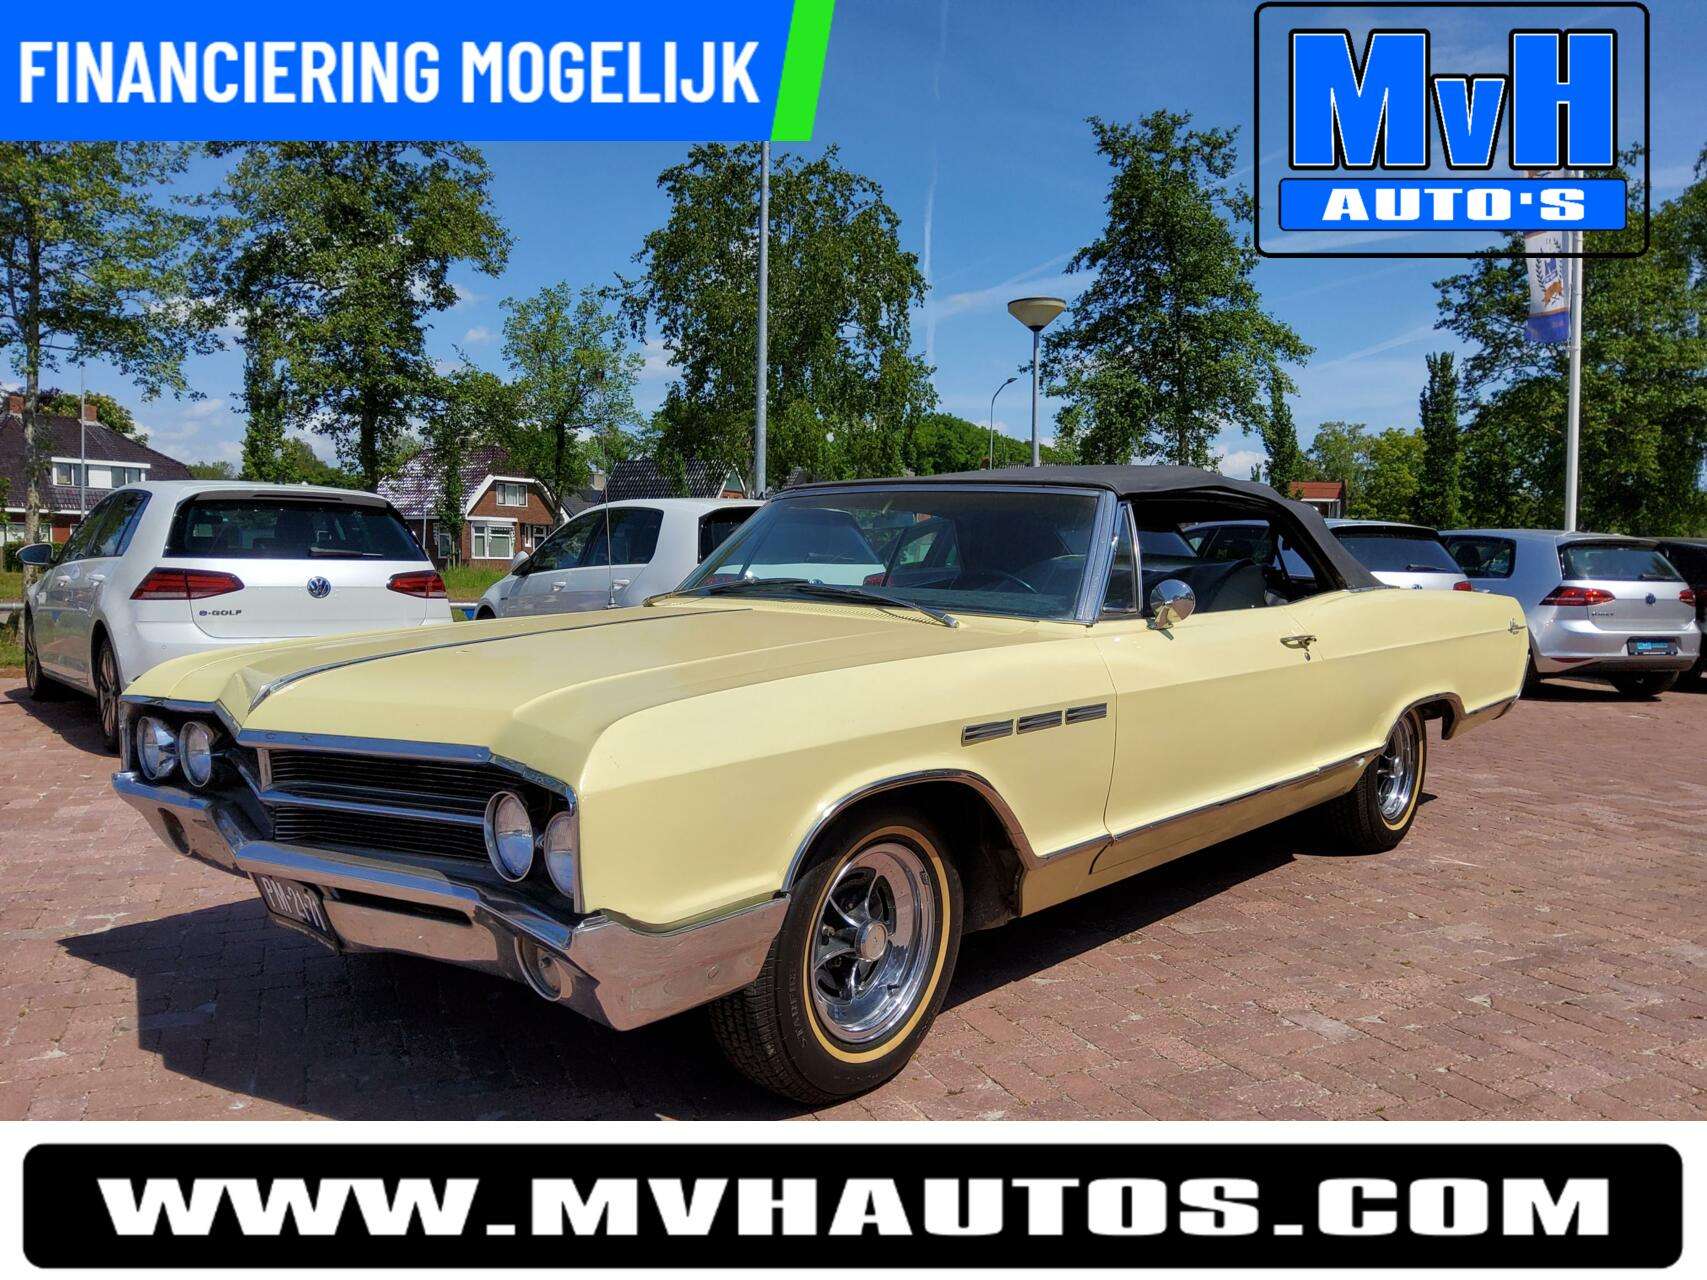 Buick Le Sabre Convertible in Yellow antique / classic in LEEK for € 13,499.-